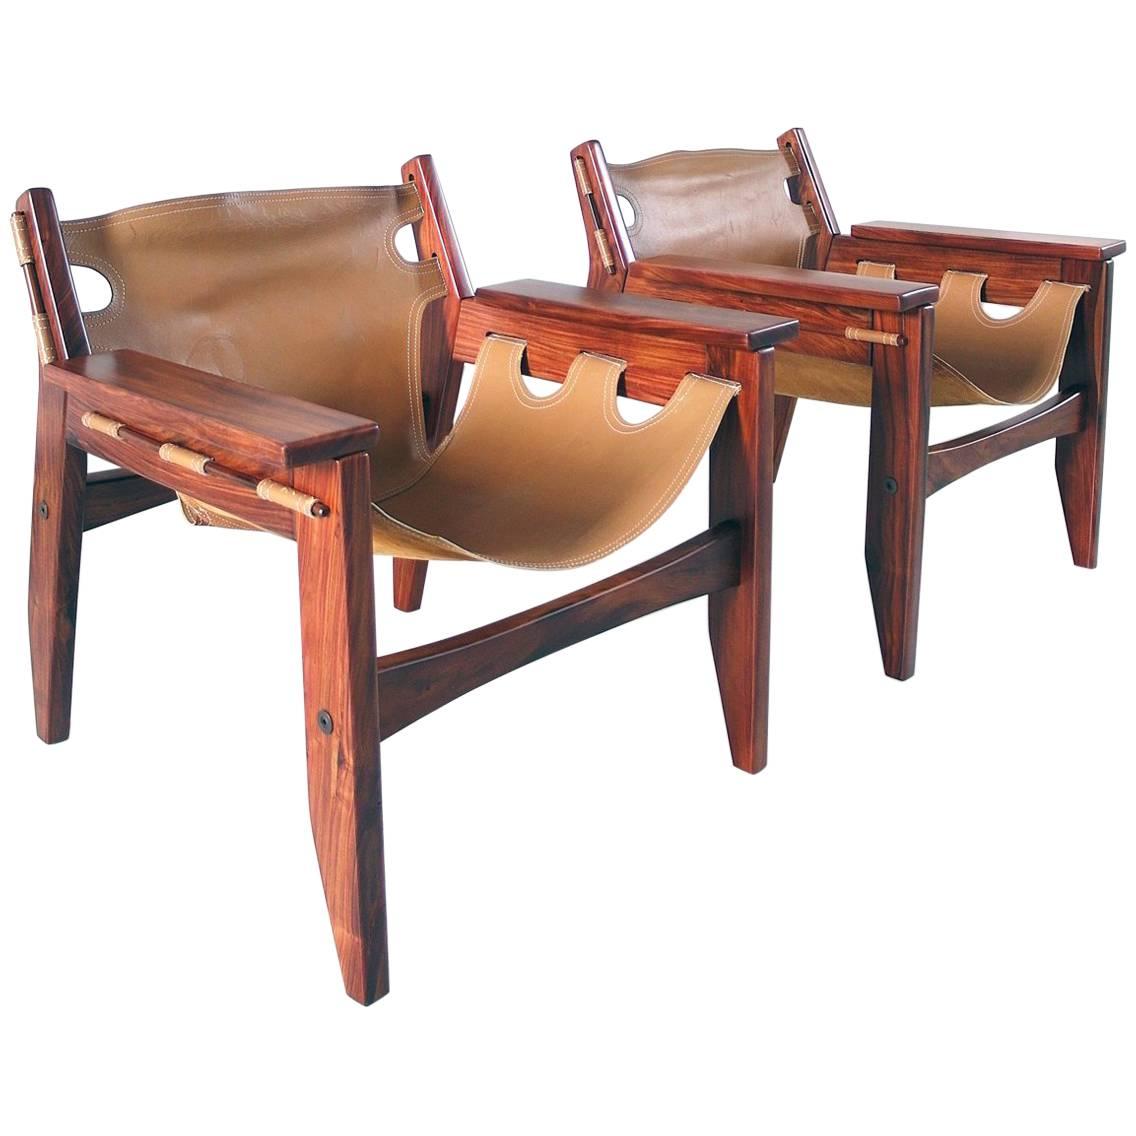 A pair of Sergio Rodrigues Kilin Lounge Chairs for Oca, Brazil, 1973